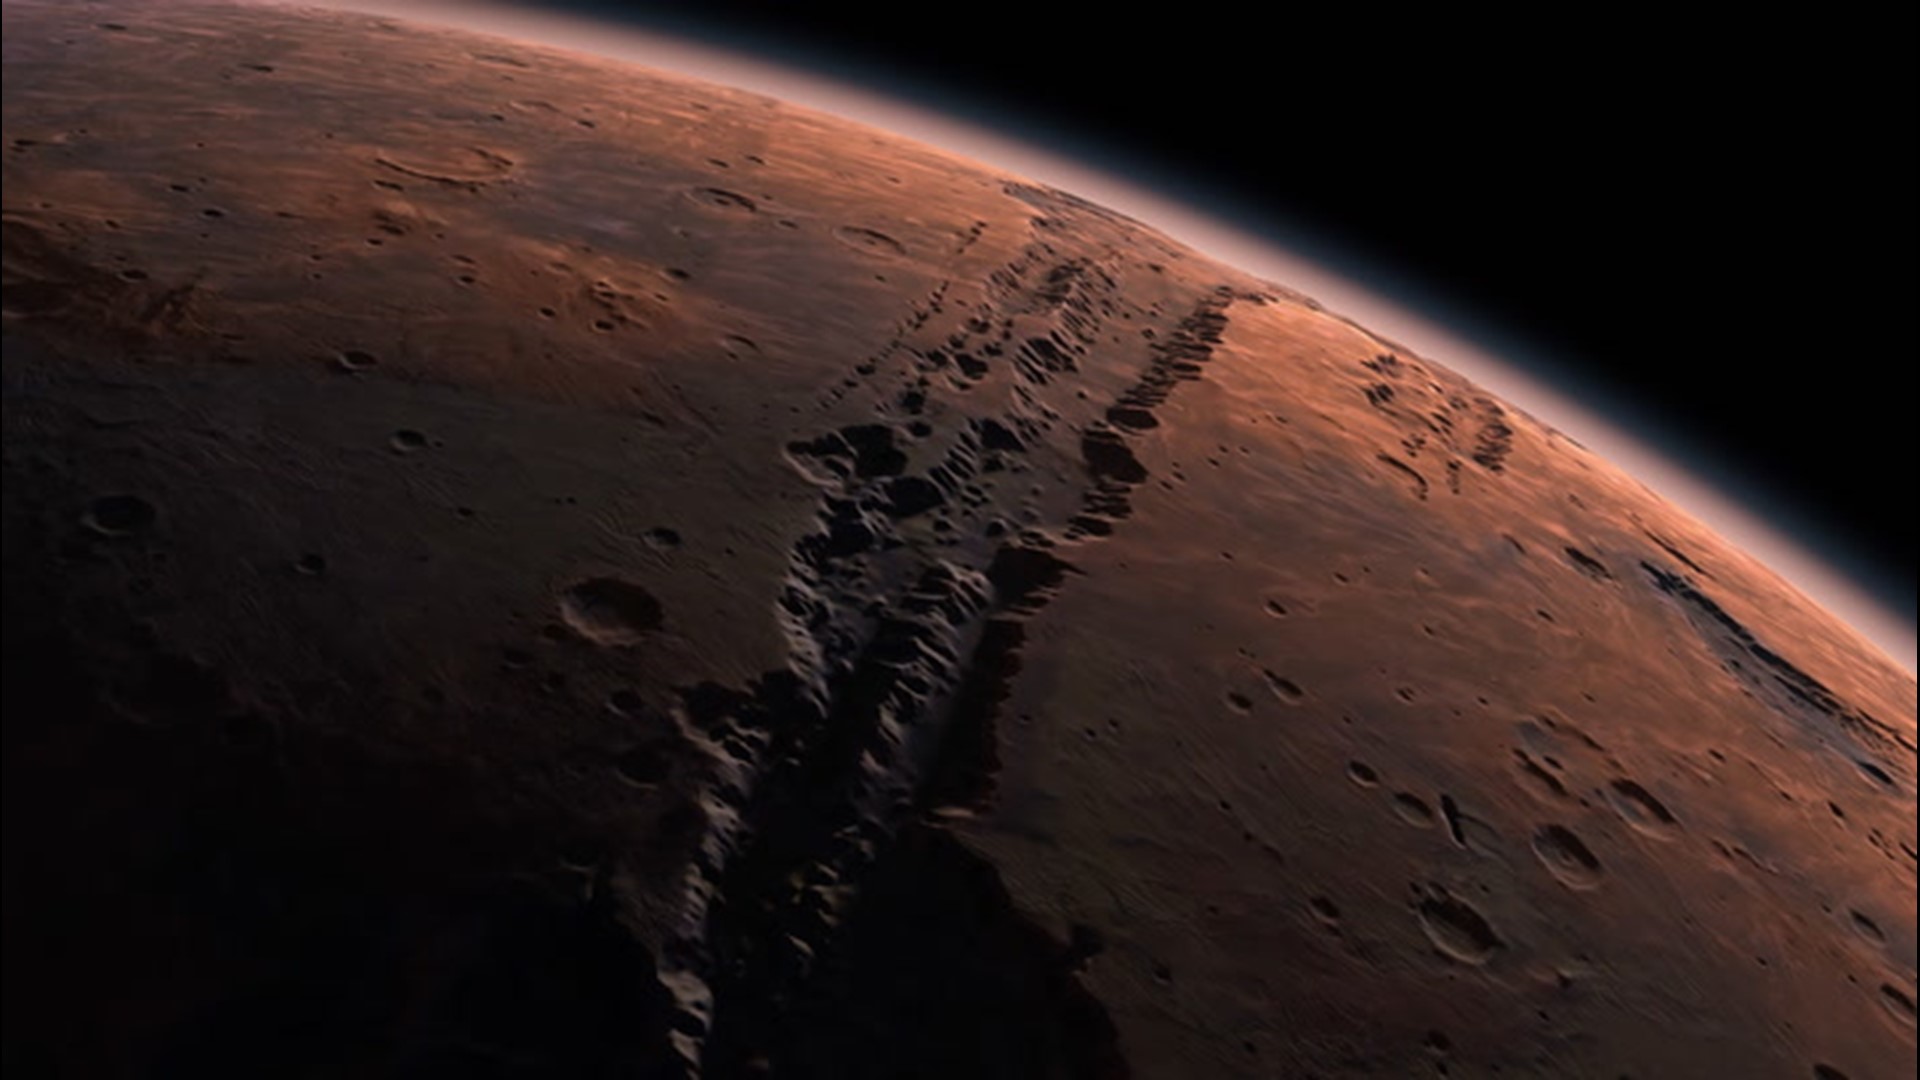 The sounds we make and hear on Earth are second nature to us Earthlings, but on Mars, sound waves act a little bit differently.